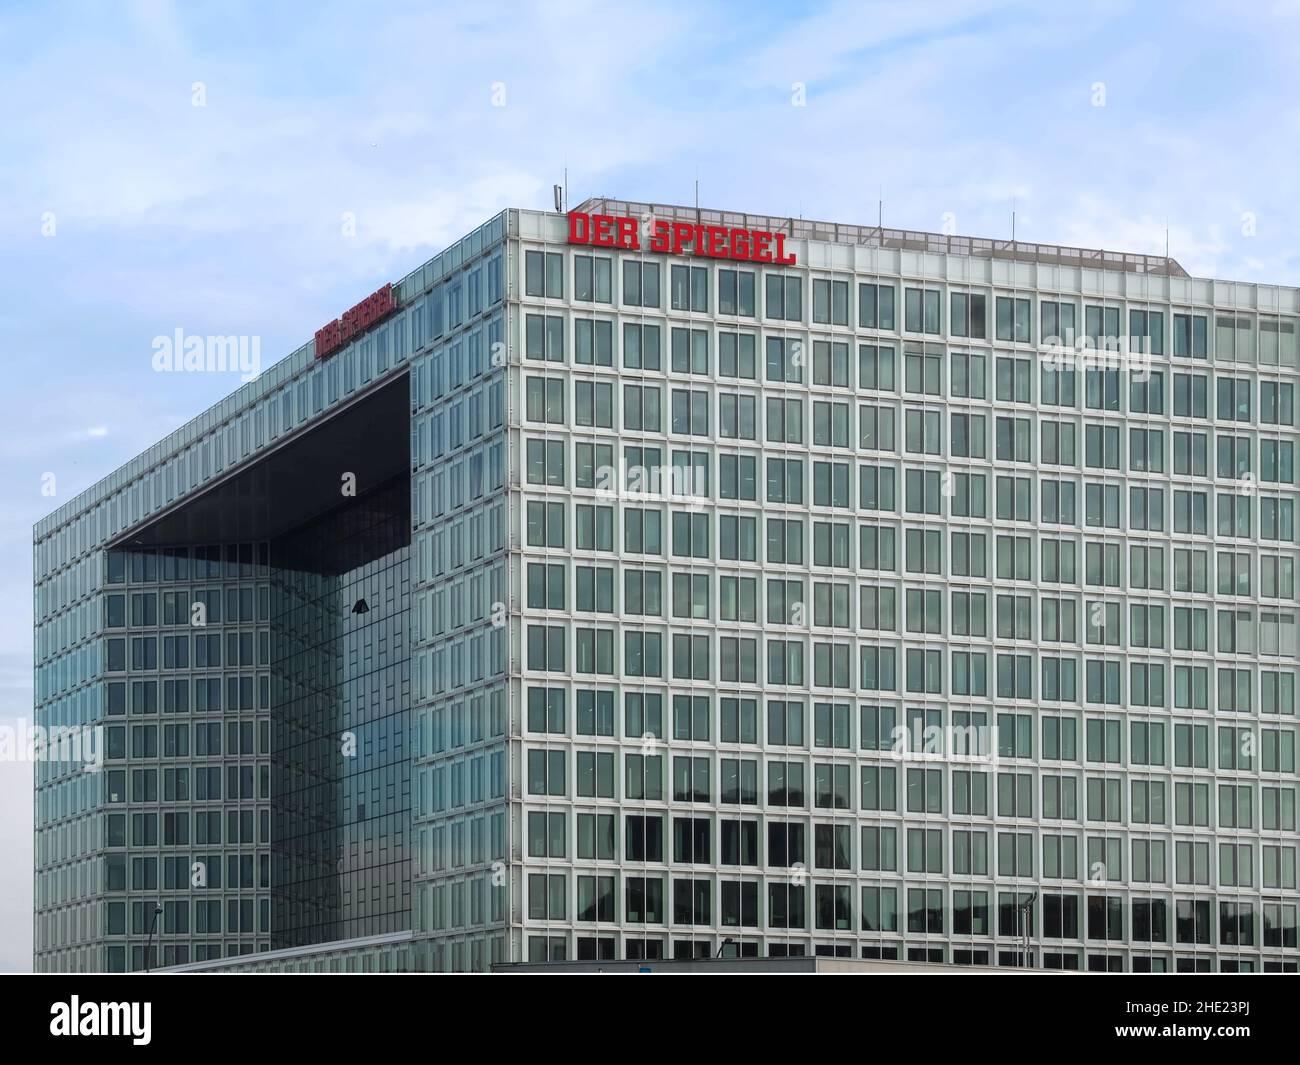 Daily News Building High Resolution Stock Photography and Images - Alamy